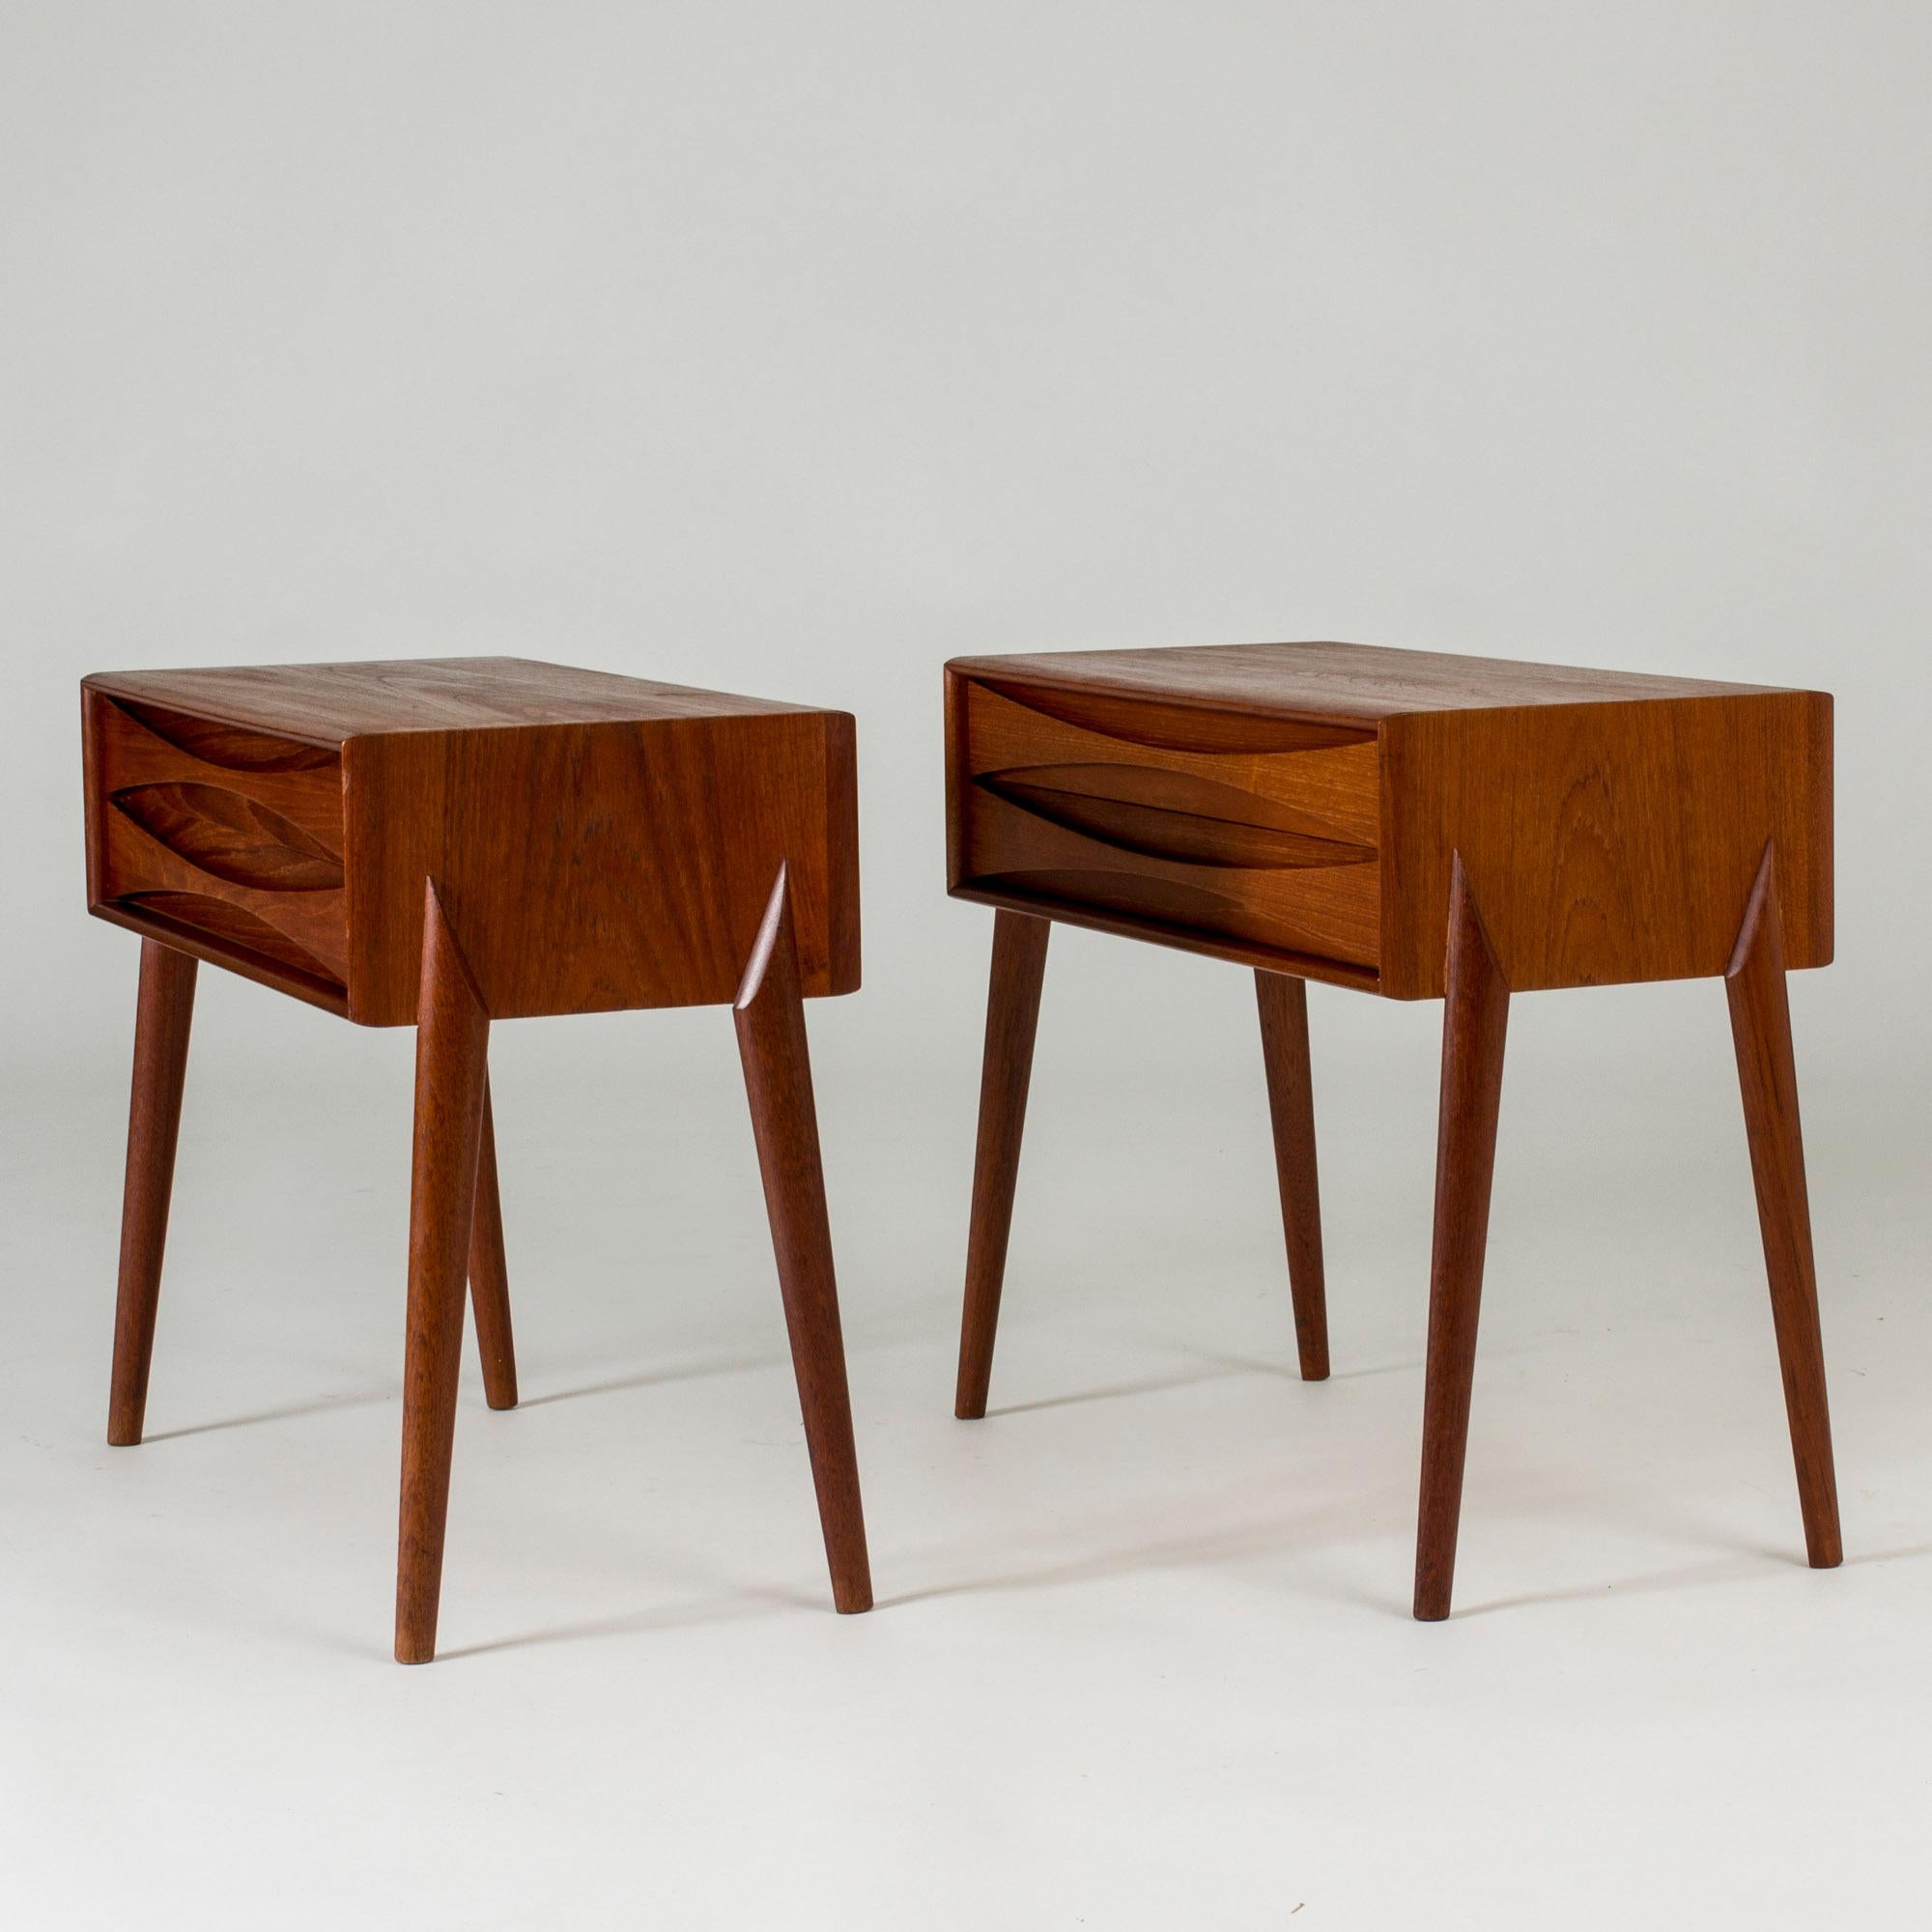 Pair of neat bedside tables by Rimbert Sandholt, made from teak. Beautifully sculpted drawer fronts, cool graphic details on the sides.